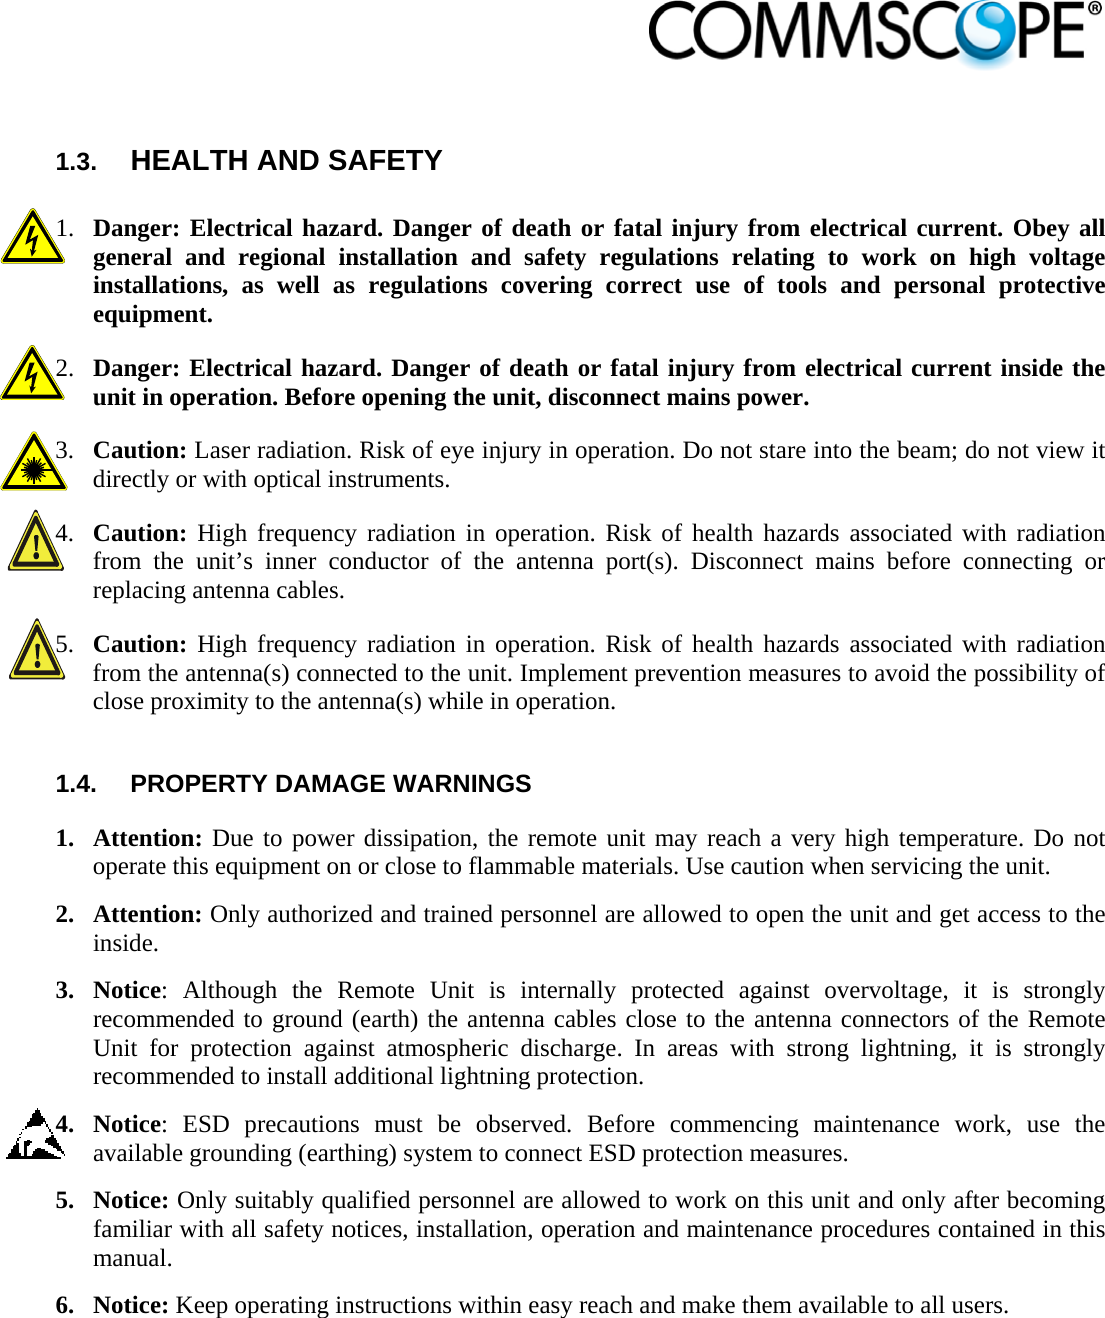                             1.3.  HEALTH AND SAFETY  1. Danger: Electrical hazard. Danger of death or fatal injury from electrical current. Obey all general and regional installation and safety regulations relating to work on high voltage installations, as well as regulations covering correct use of tools and personal protective equipment. 2. Danger: Electrical hazard. Danger of death or fatal injury from electrical current inside the unit in operation. Before opening the unit, disconnect mains power. 3. Caution: Laser radiation. Risk of eye injury in operation. Do not stare into the beam; do not view it directly or with optical instruments. 4. Caution: High frequency radiation in operation. Risk of health hazards associated with radiation from the unit’s inner conductor of the antenna port(s). Disconnect mains before connecting or replacing antenna cables. 5. Caution: High frequency radiation in operation. Risk of health hazards associated with radiation from the antenna(s) connected to the unit. Implement prevention measures to avoid the possibility of close proximity to the antenna(s) while in operation.   1.4.  PROPERTY DAMAGE WARNINGS 1. Attention: Due to power dissipation, the remote unit may reach a very high temperature. Do not operate this equipment on or close to flammable materials. Use caution when servicing the unit.  2. Attention: Only authorized and trained personnel are allowed to open the unit and get access to the inside. 3. Notice: Although the Remote Unit is internally protected against overvoltage, it is strongly recommended to ground (earth) the antenna cables close to the antenna connectors of the Remote Unit for protection against atmospheric discharge. In areas with strong lightning, it is strongly recommended to install additional lightning protection. 4. Notice: ESD precautions must be observed. Before commencing maintenance work, use the available grounding (earthing) system to connect ESD protection measures. 5. Notice: Only suitably qualified personnel are allowed to work on this unit and only after becoming familiar with all safety notices, installation, operation and maintenance procedures contained in this manual. 6. Notice: Keep operating instructions within easy reach and make them available to all users. 